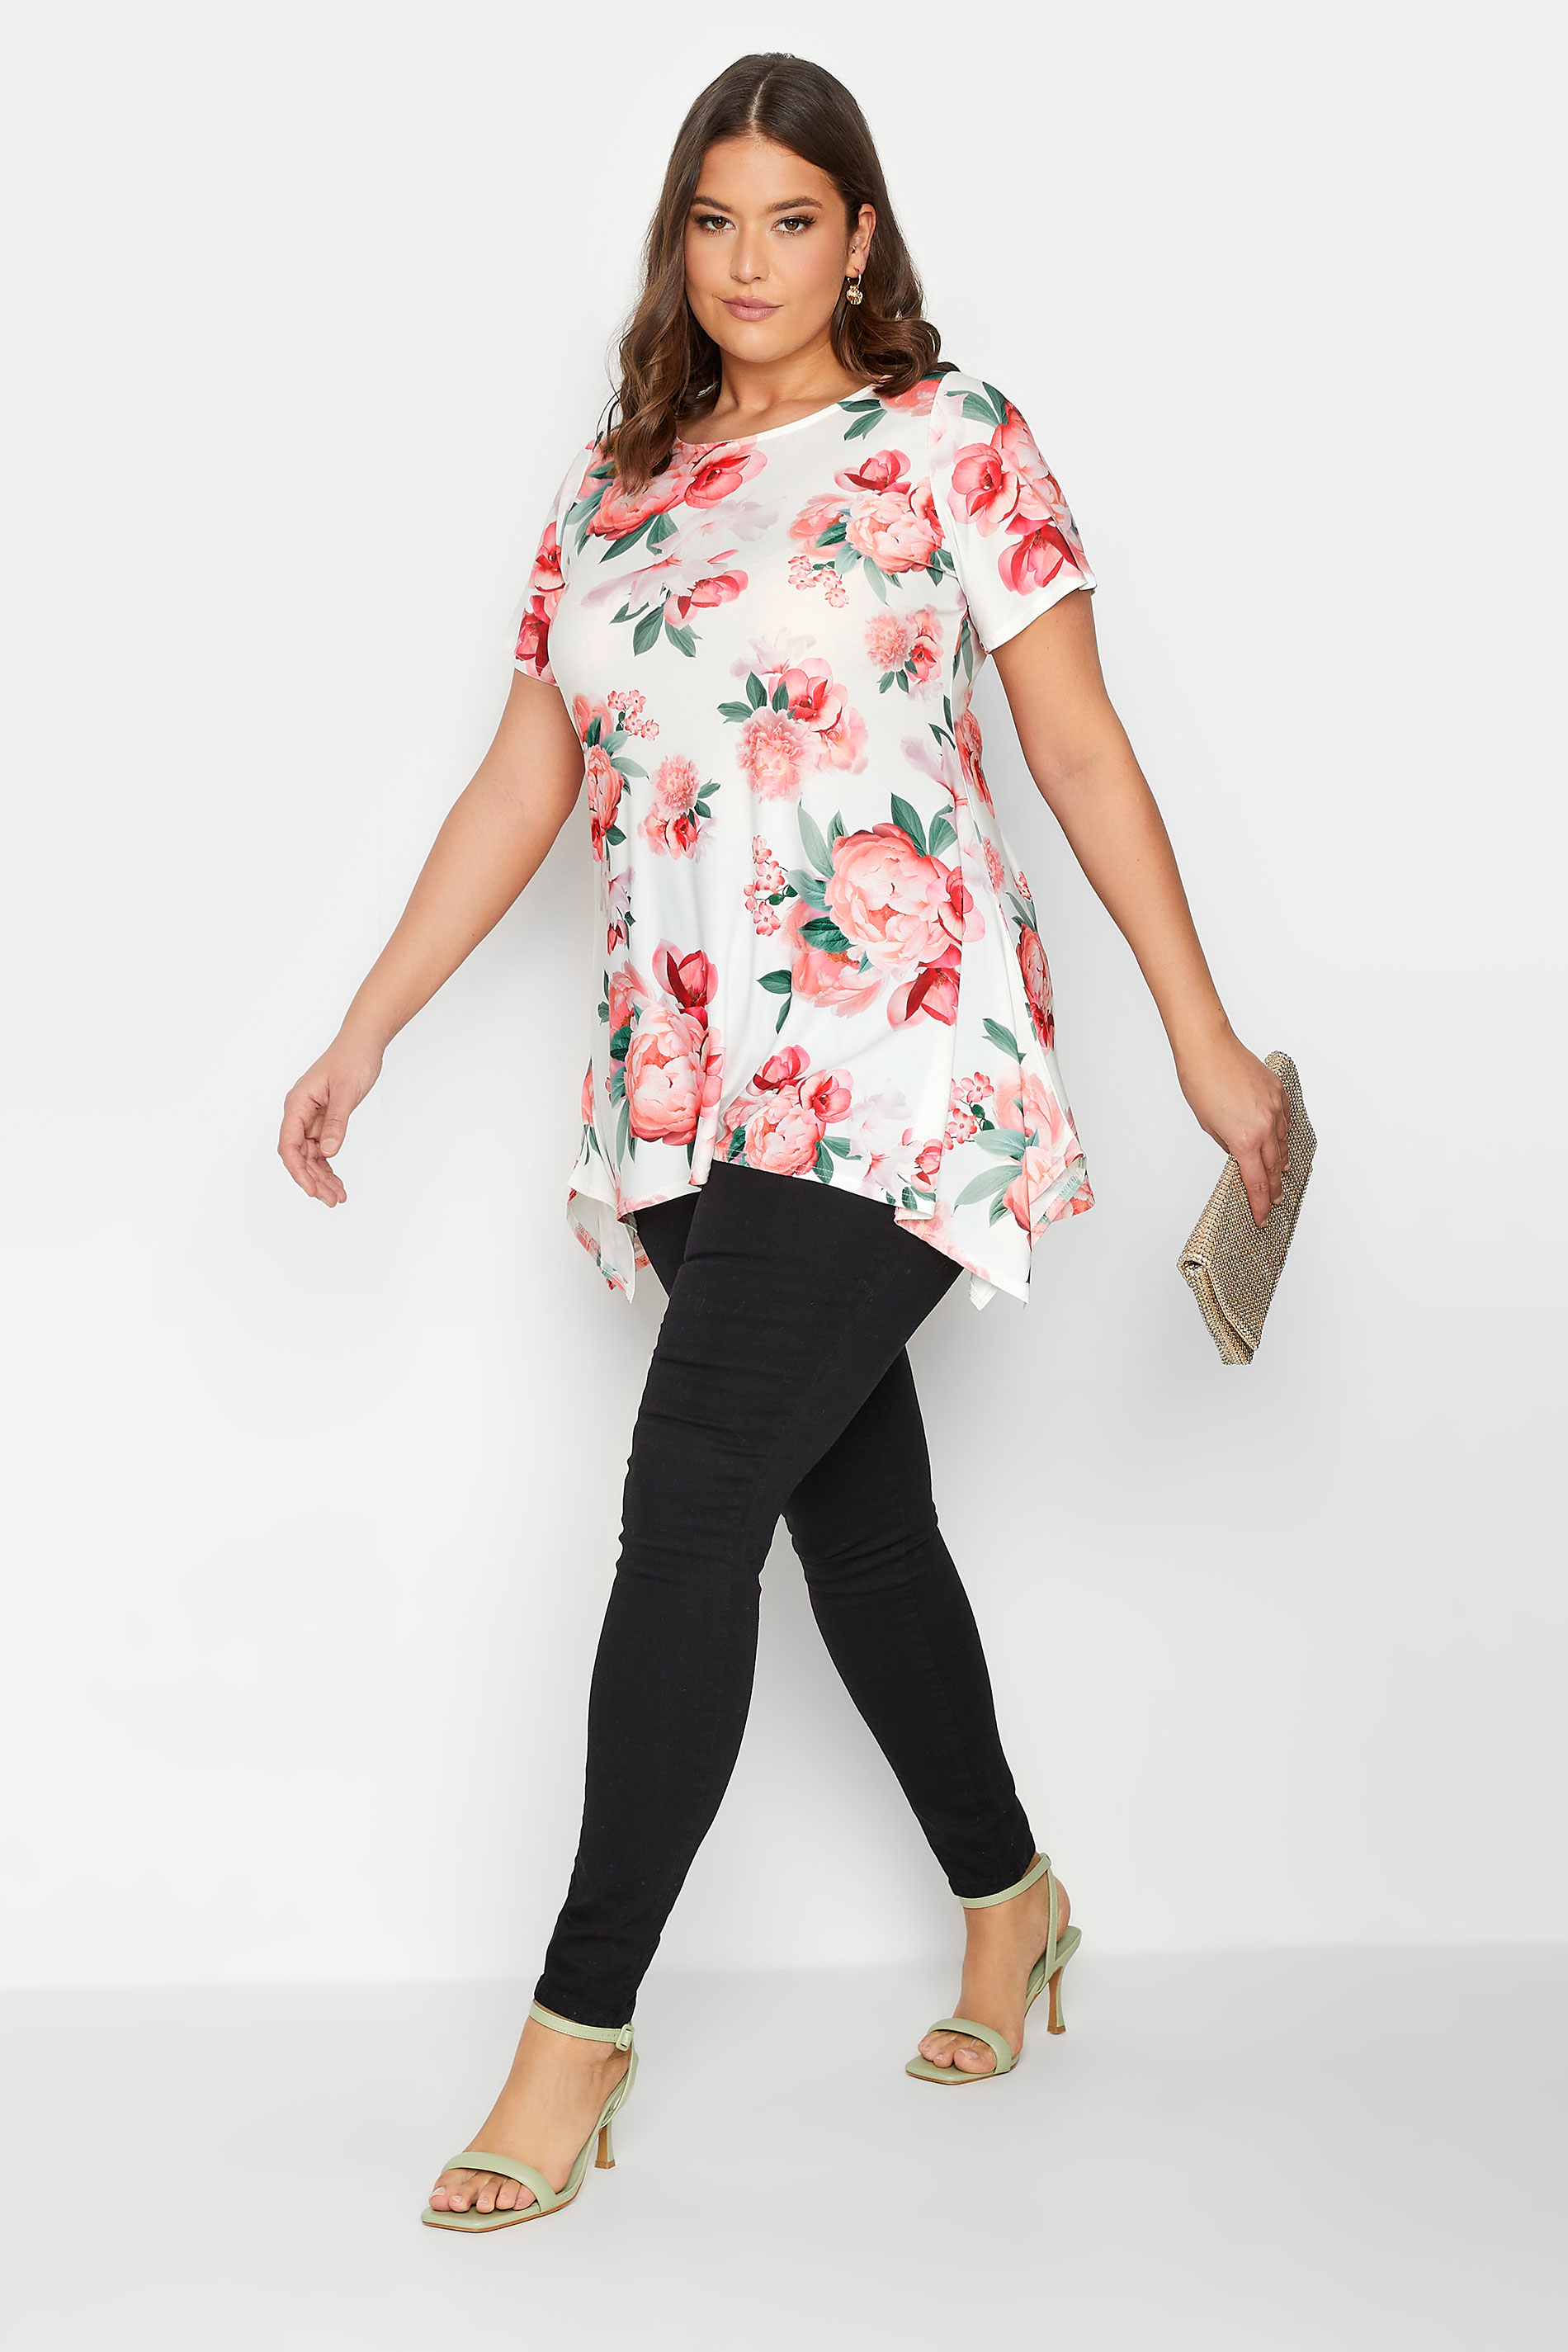 YOURS LONDON Plus Size White Floral Print Hanky Hem Top | Yours Clothing 2